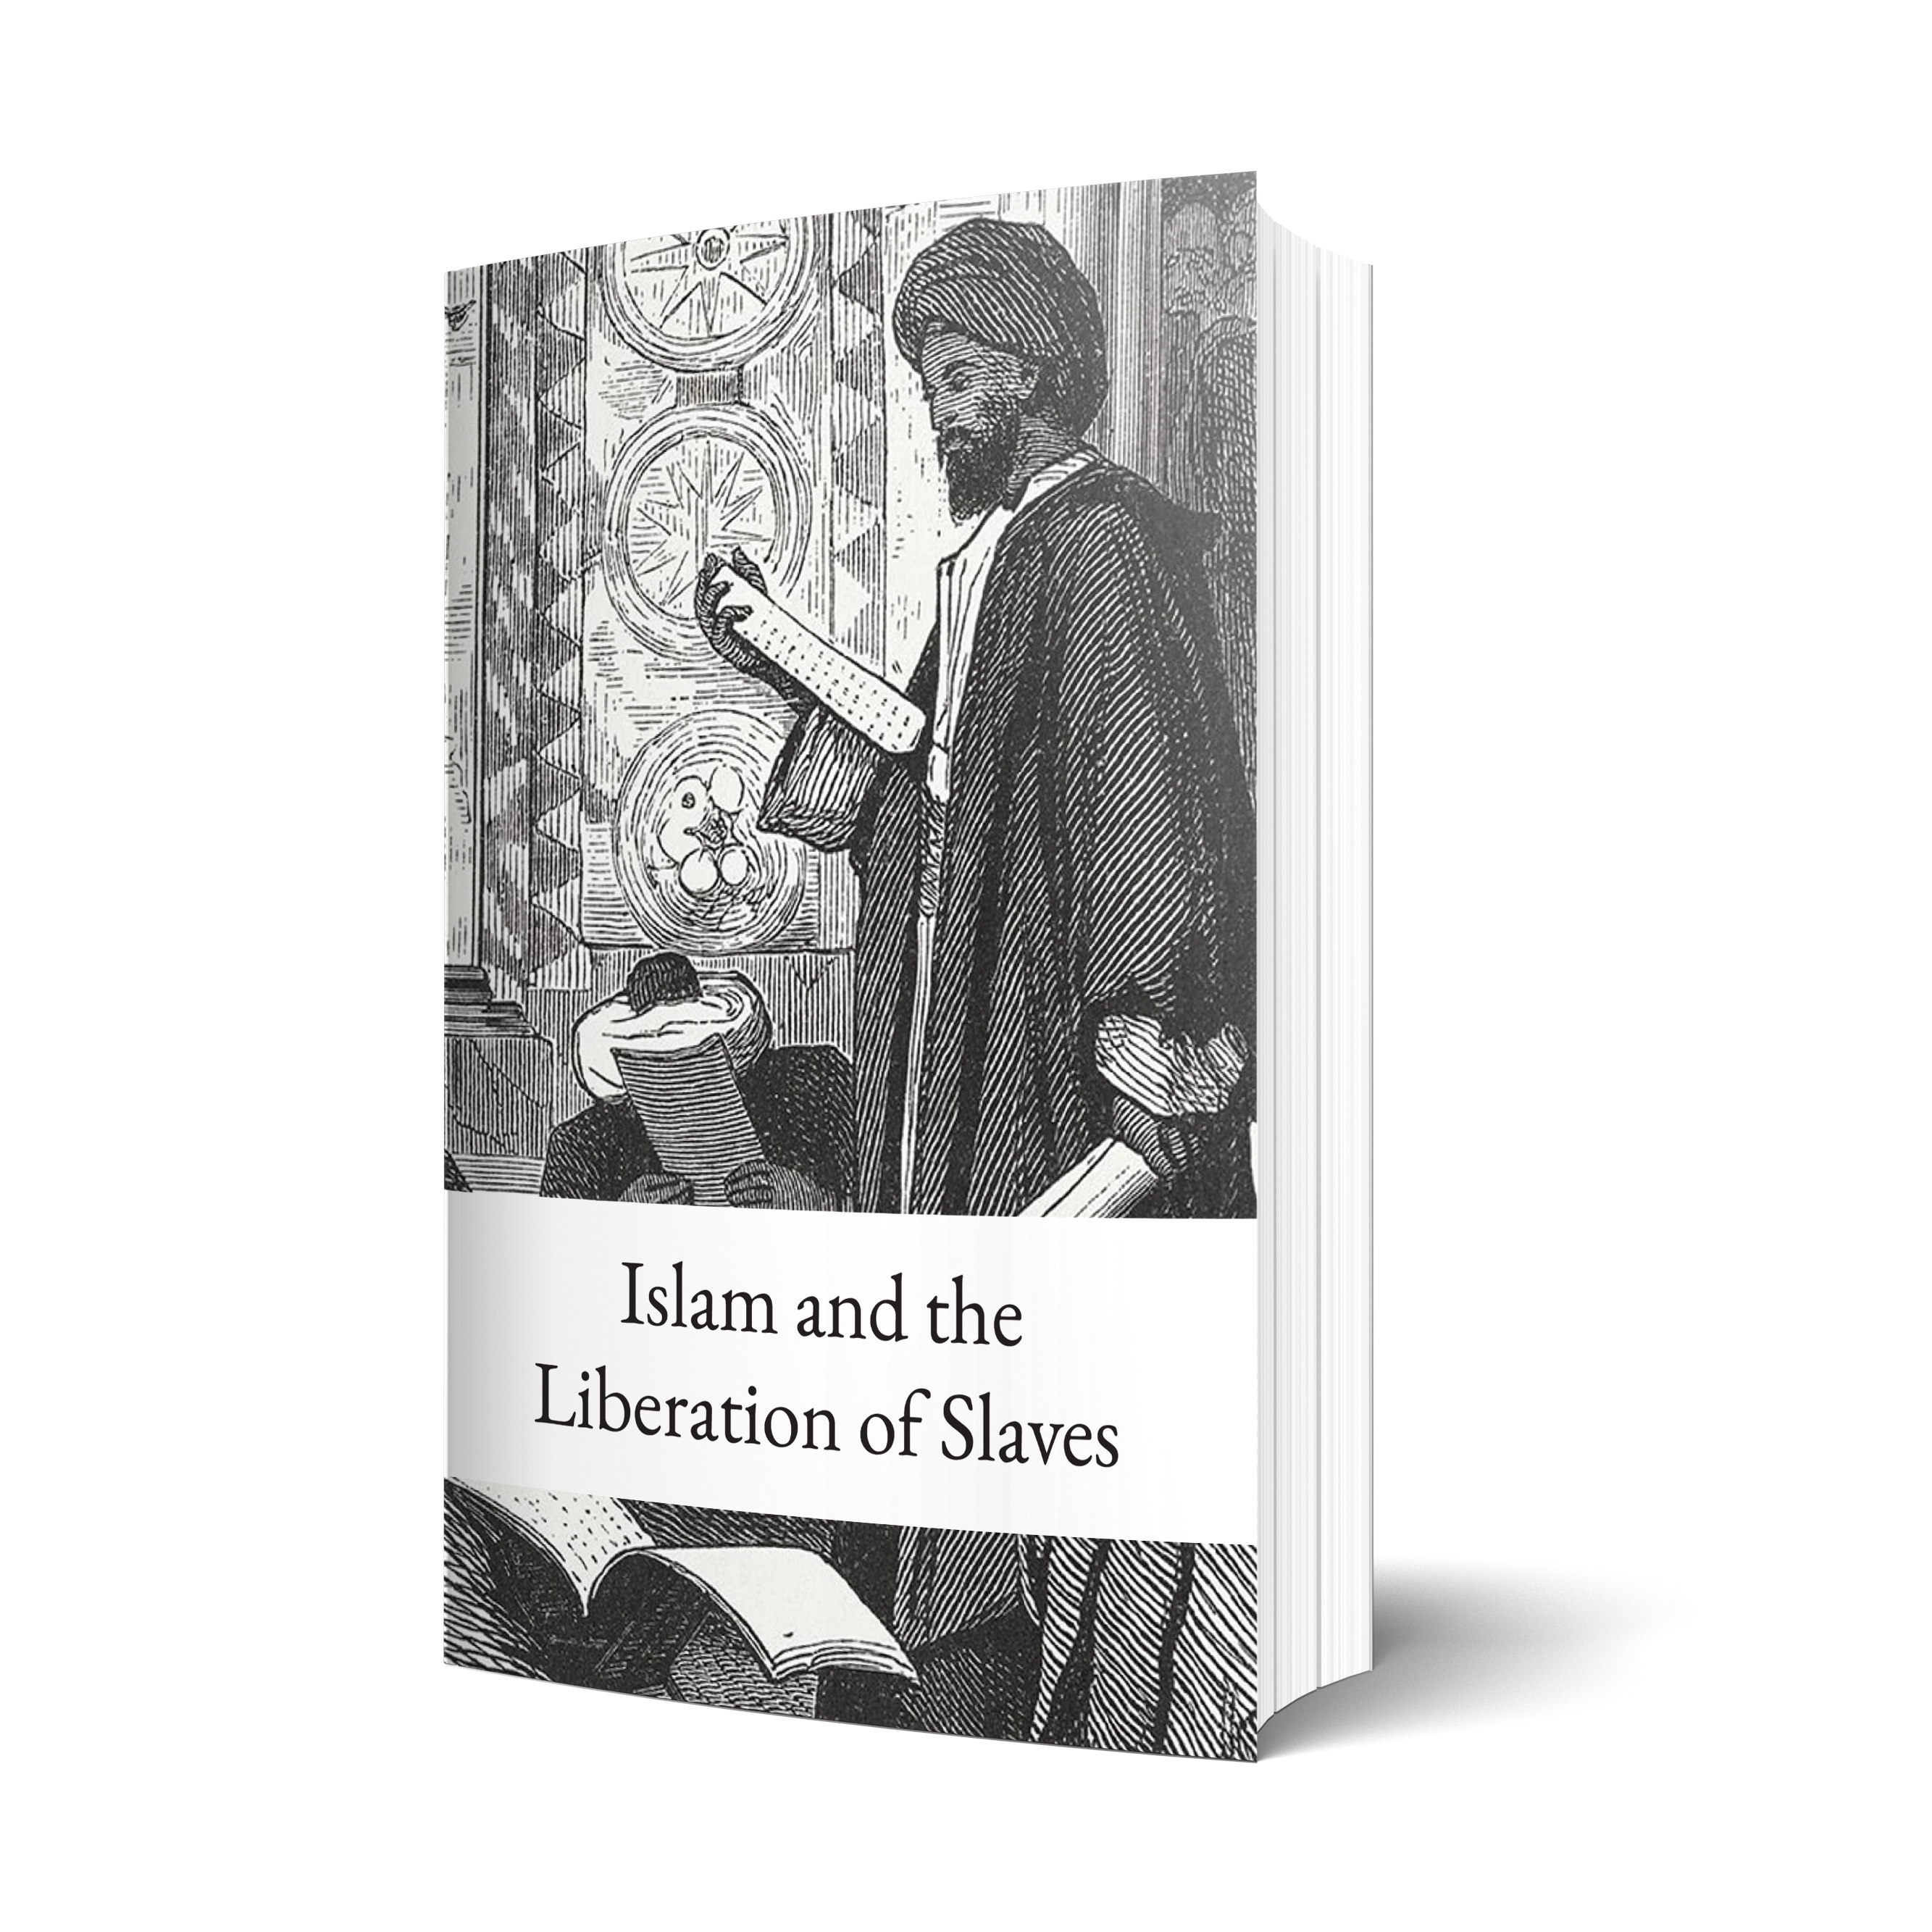 Islam and the Liberation of Slaves